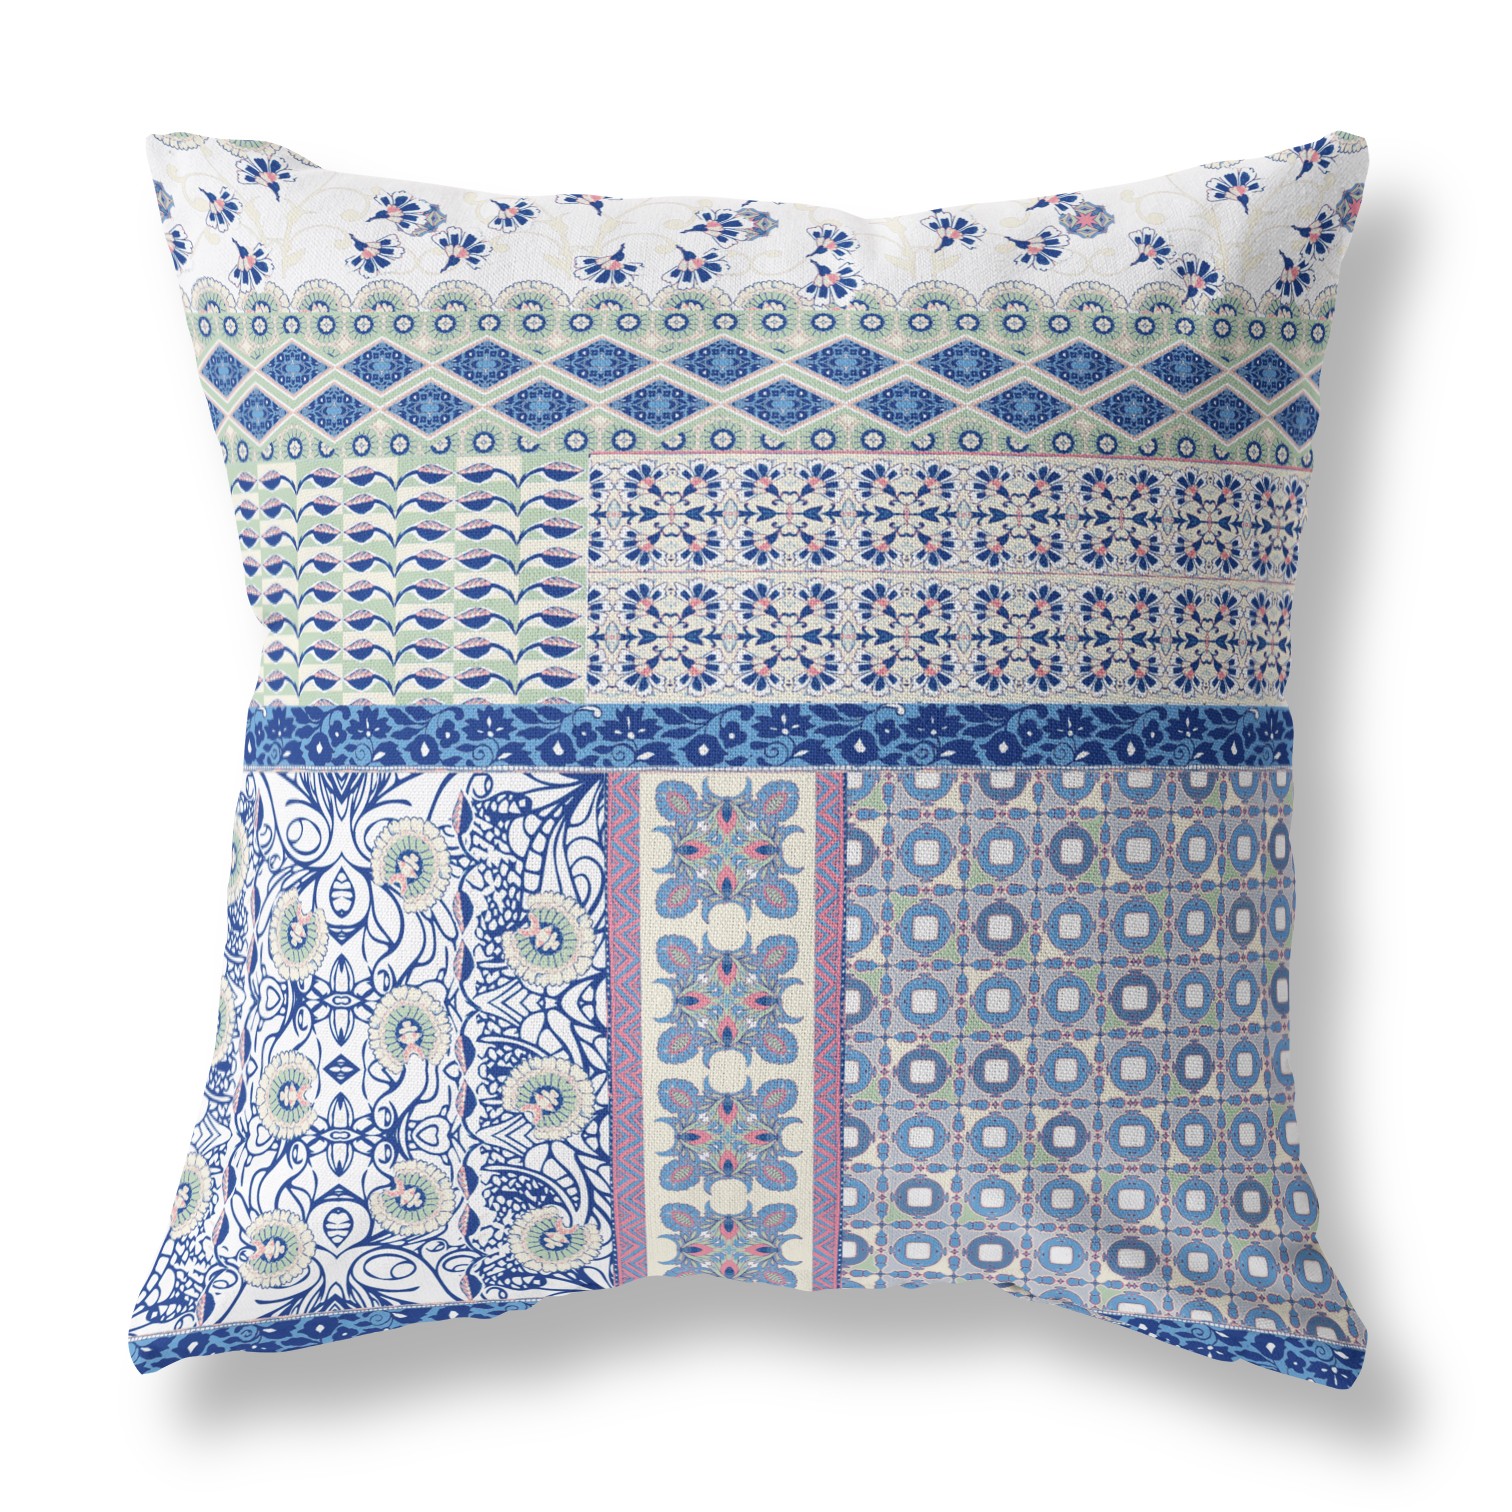 20” Blue Lavender White Patch Indoor Outdoor Zippered Throw Pillow-410952-1